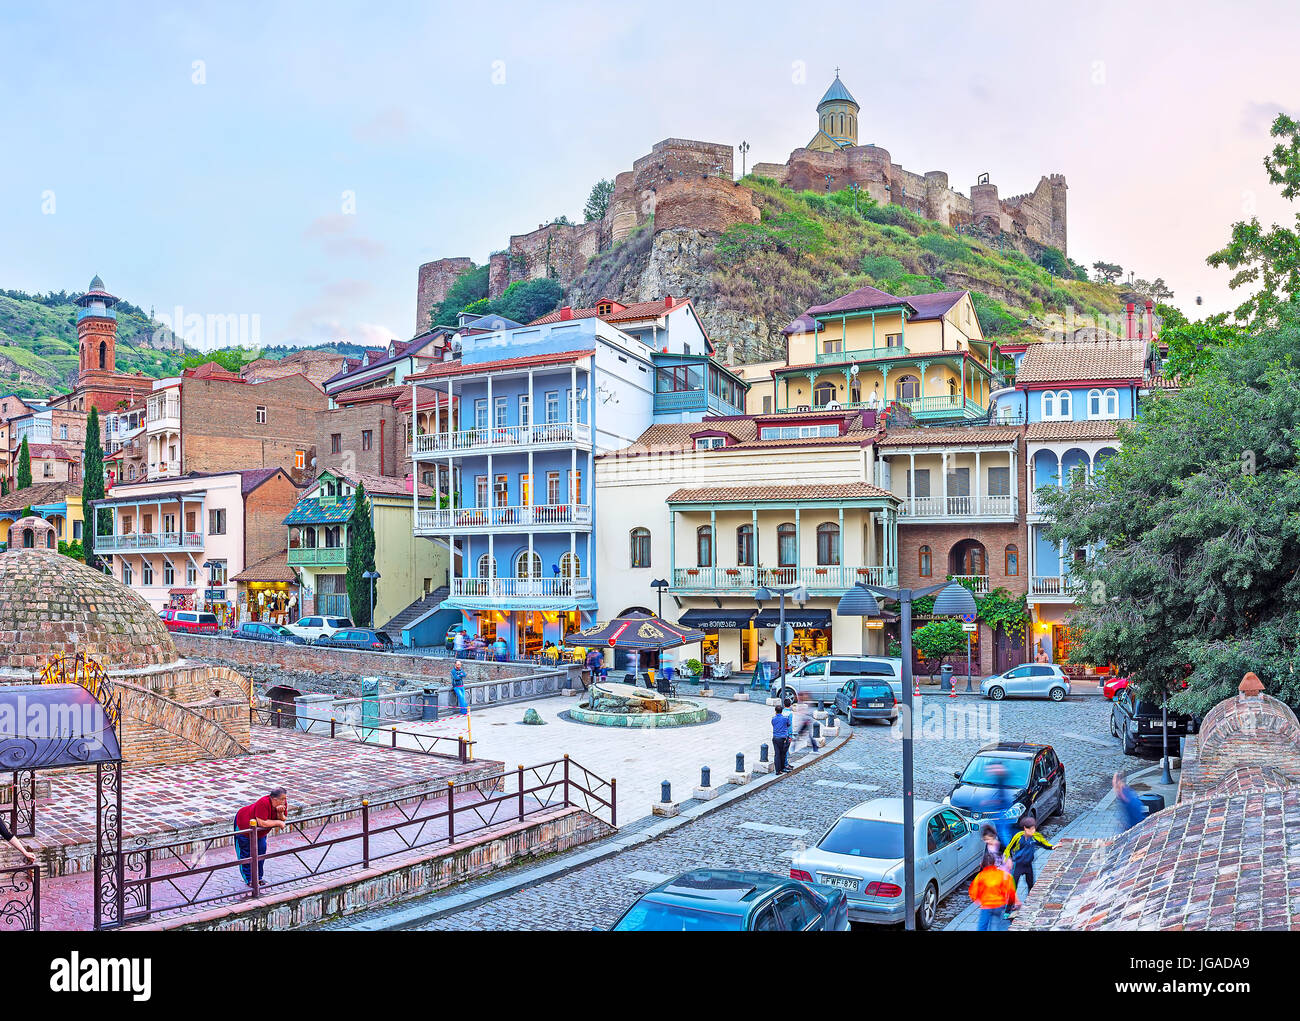 TBILISI, GEORGIA - JUNE 5, 2016: The Sololaki hill, topped with Narikala fortress, is surrounded by the old quarters with scenic edifices and Sulphur  Stock Photo